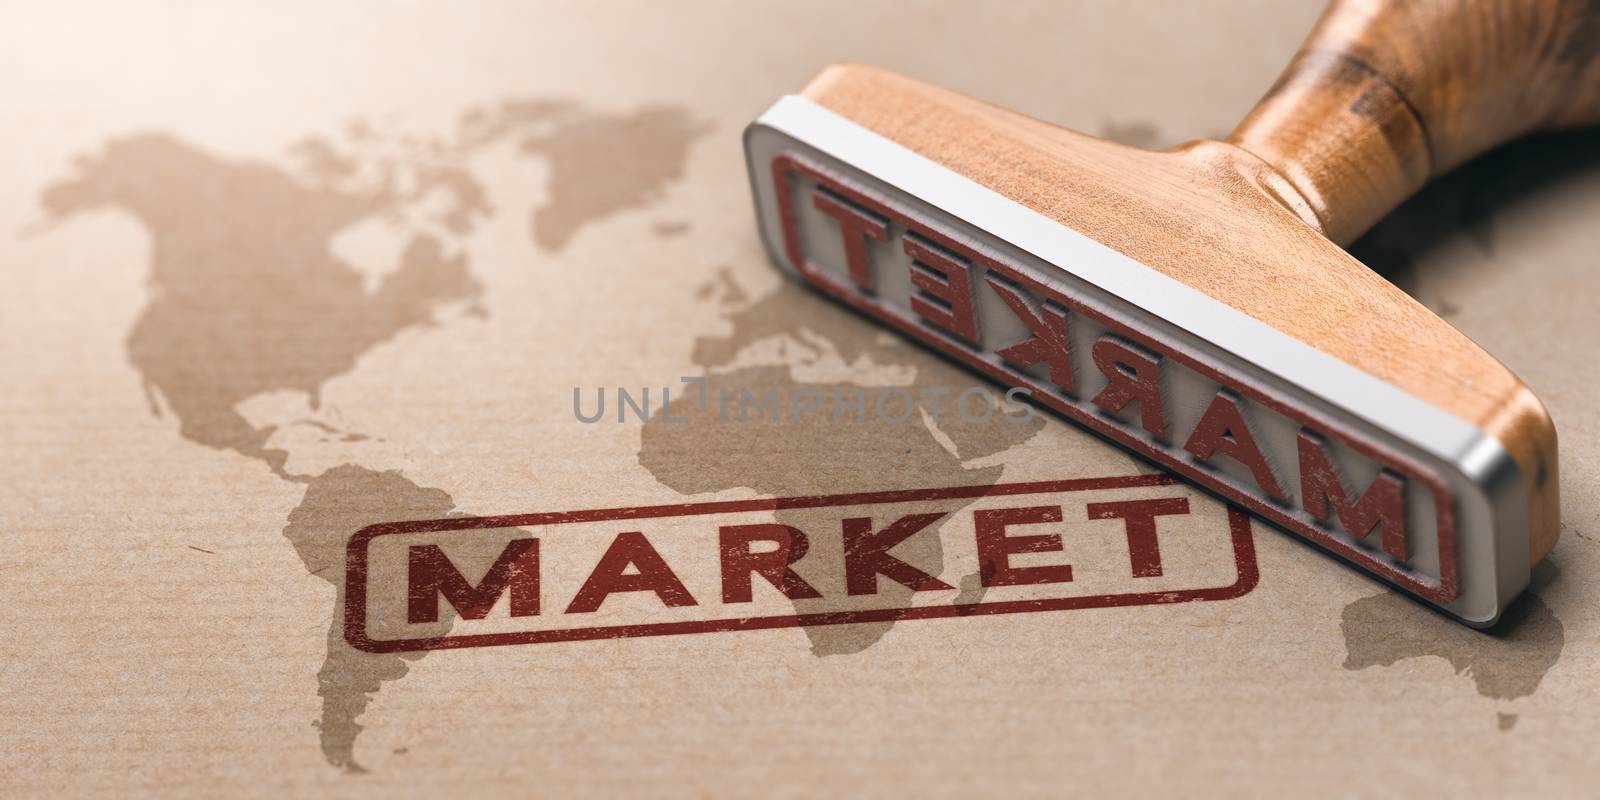 3D illustration of a rubber stamp over paper background with a world map watermarked. Concept of global market or international business development